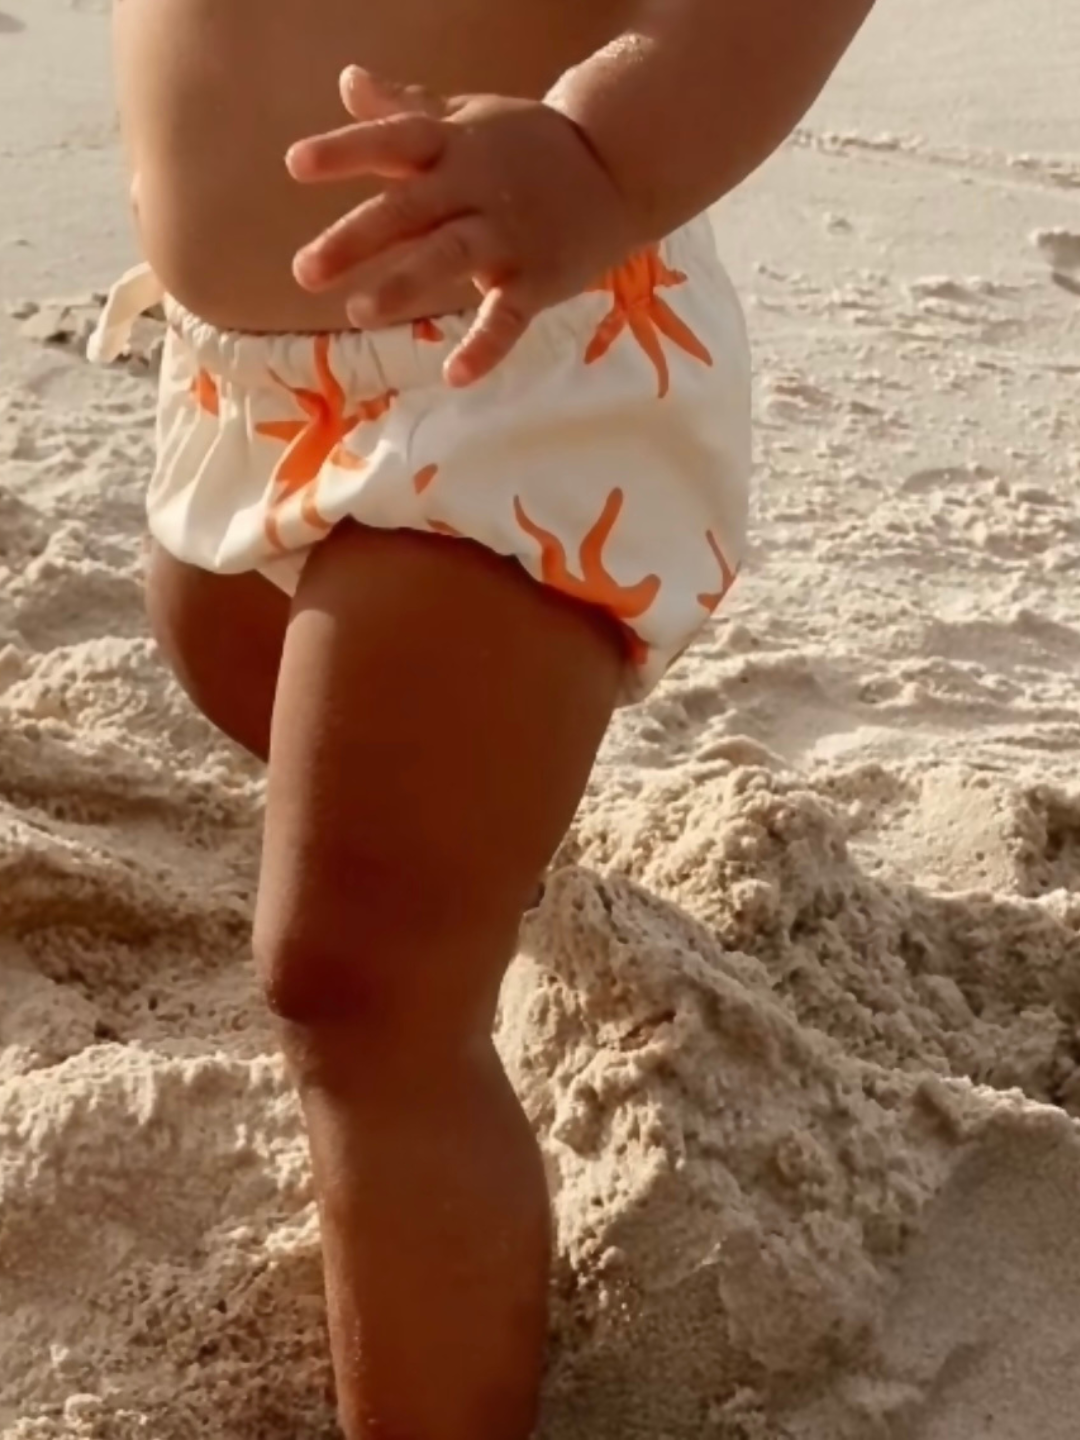 Capri | A waist-down image of a toddler wearing the Capri swim diaper in cream with orange stars all over, standing on sand.